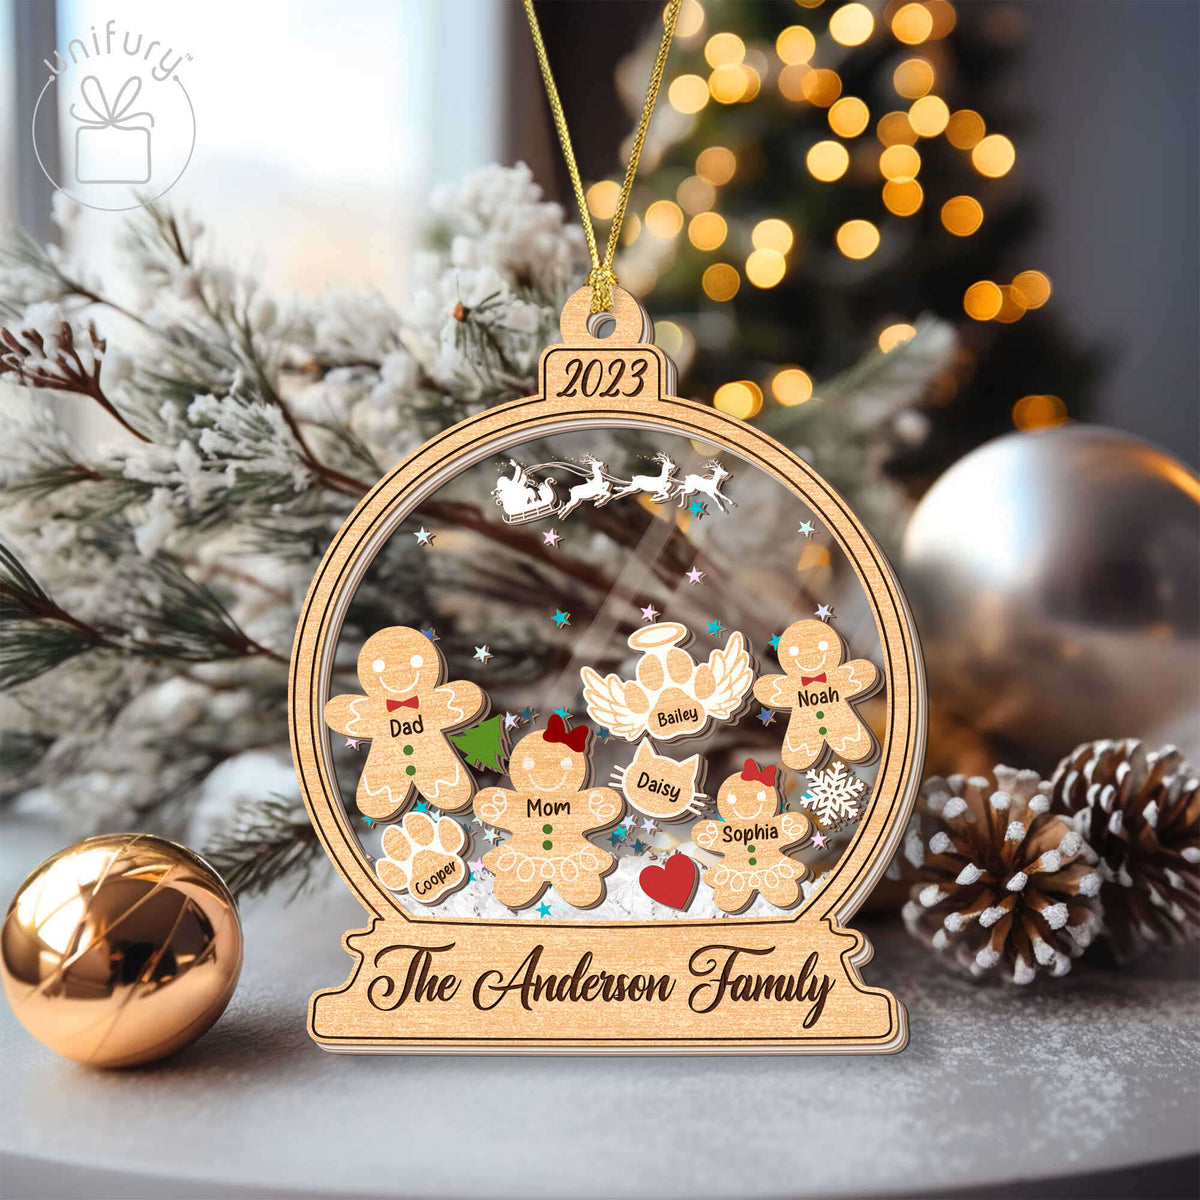 Personalized Key Gingerbread Family Christmas Cookie Shaker Ornament